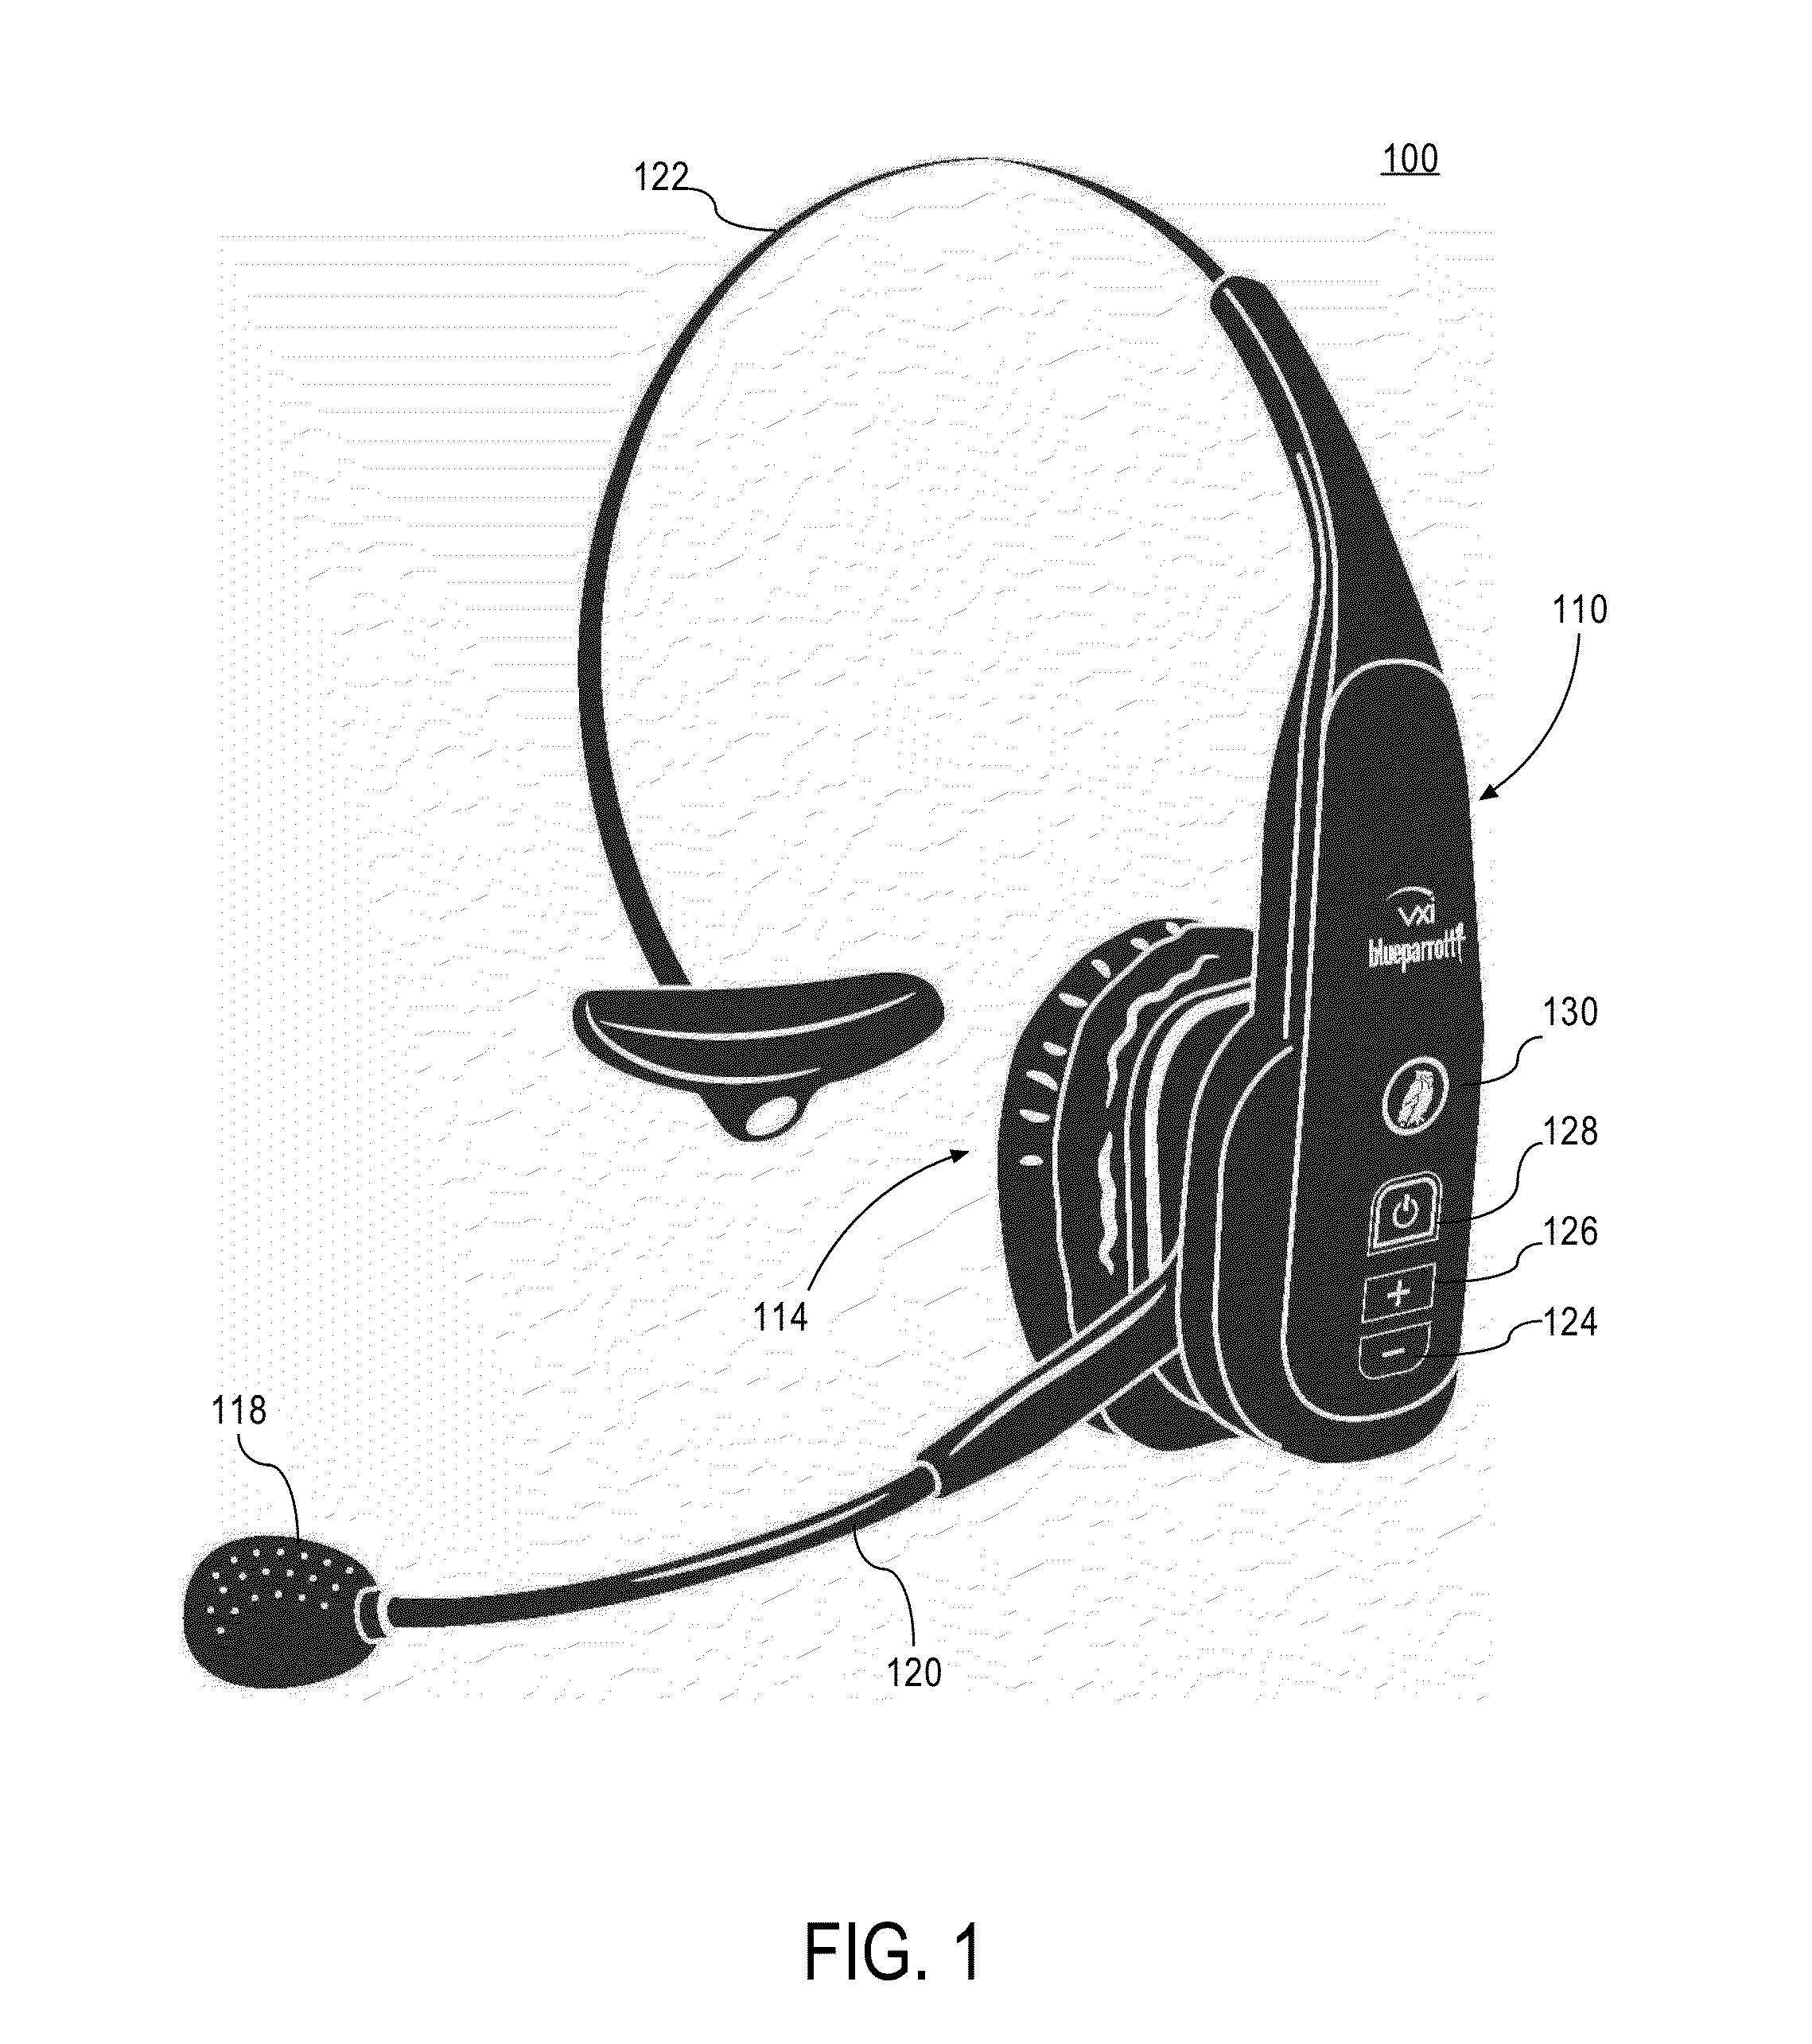 Headset system with user-configurable function button